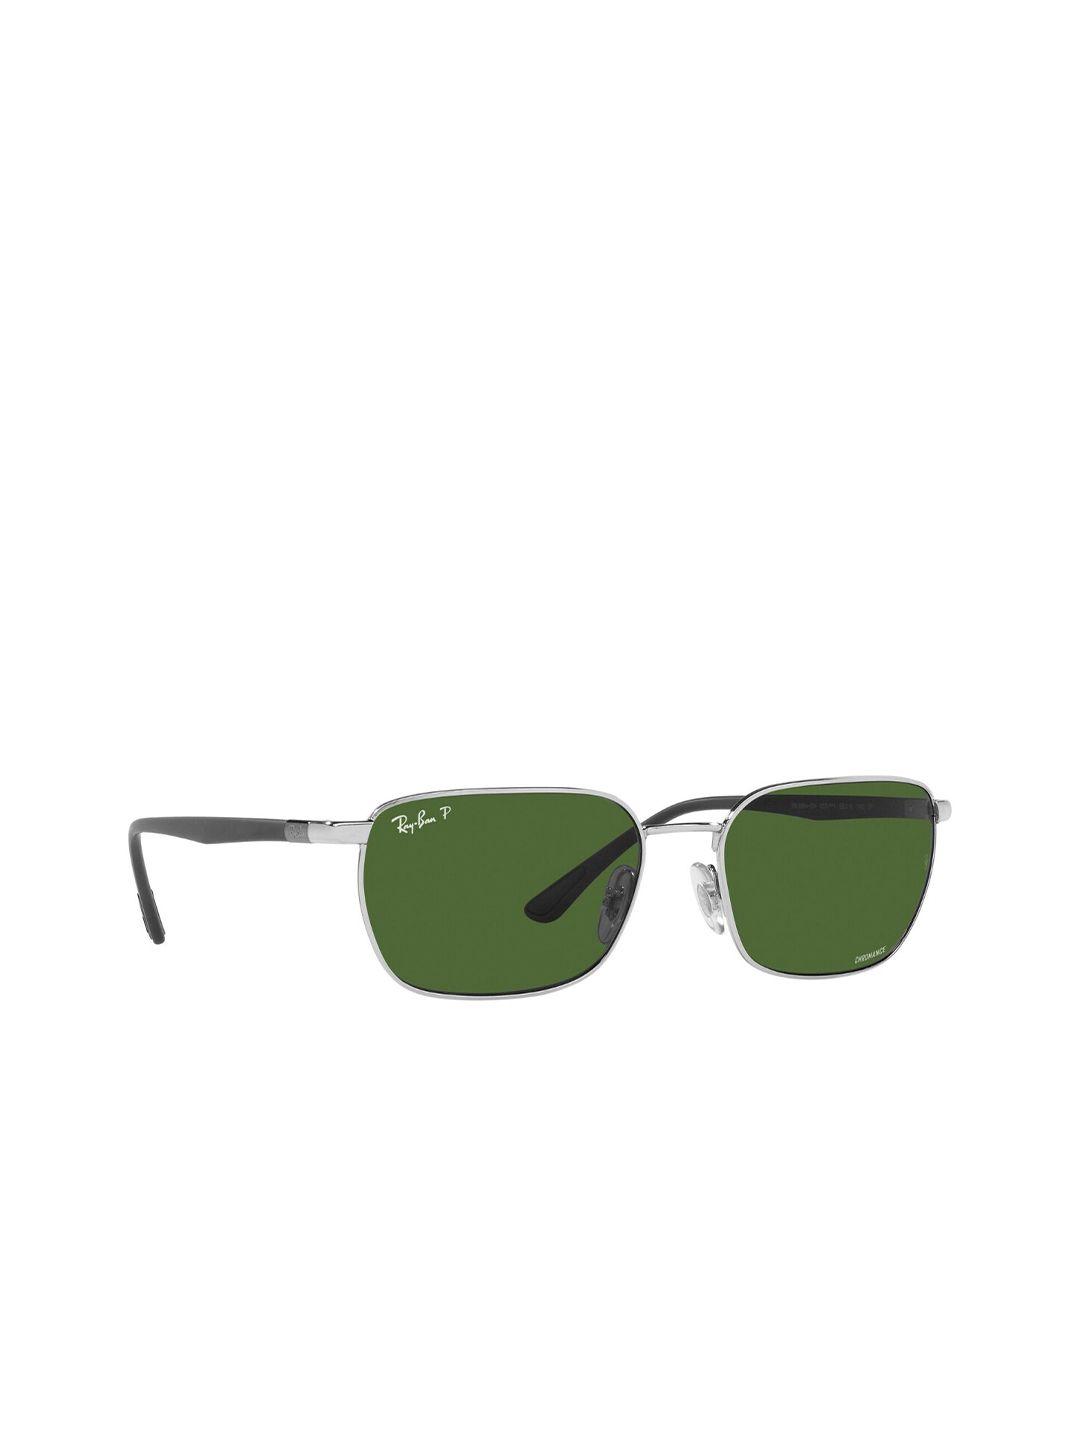 ray-ban unisex green lens & silver toned sunglasses with polarised lens 8056597533065